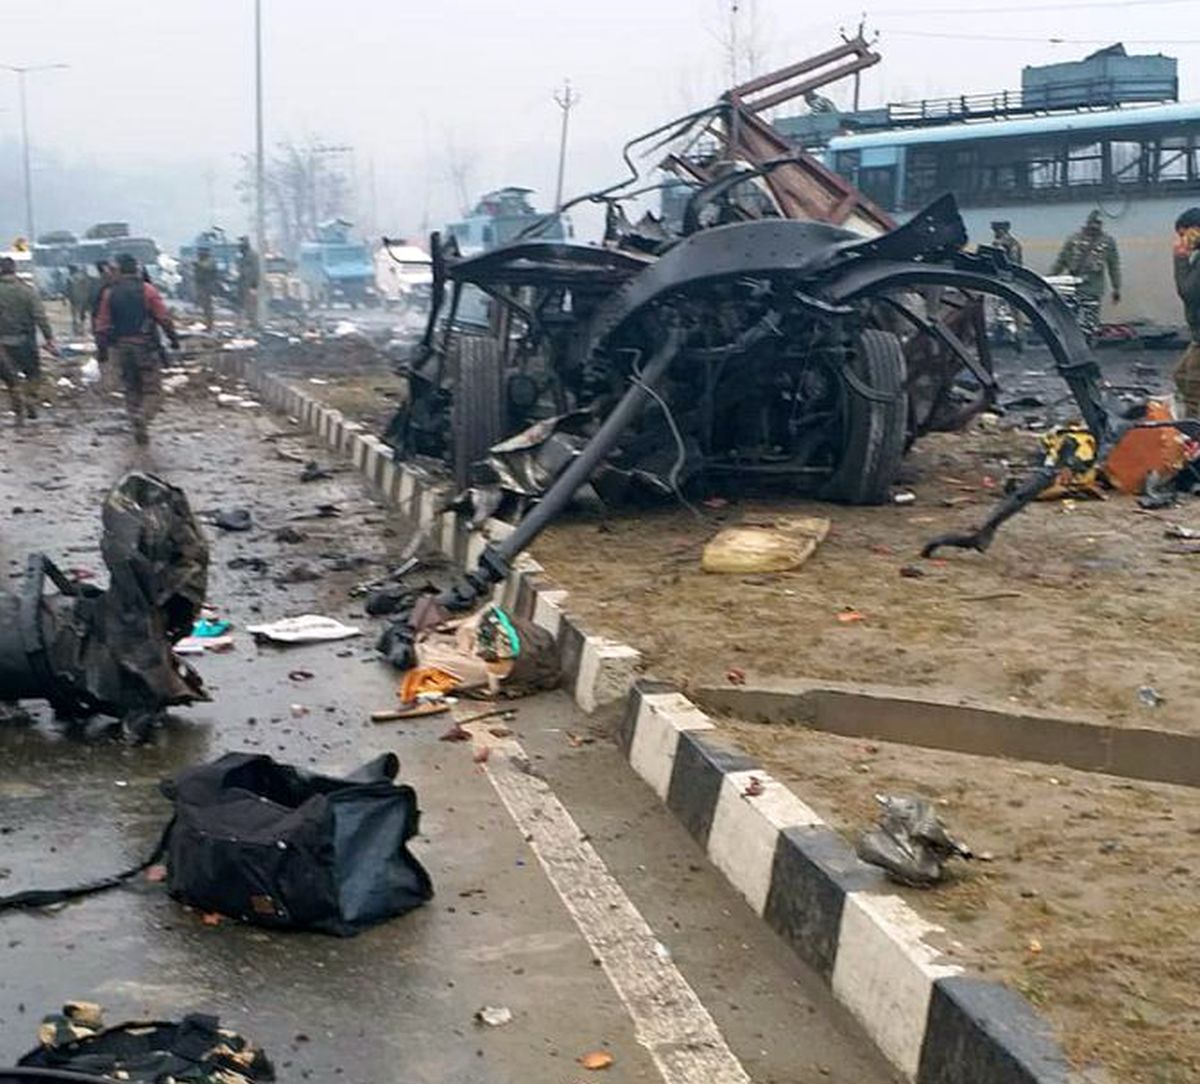 Cong targets Modi on Malik's explosive claims on Pulwama attack - Rediff.com